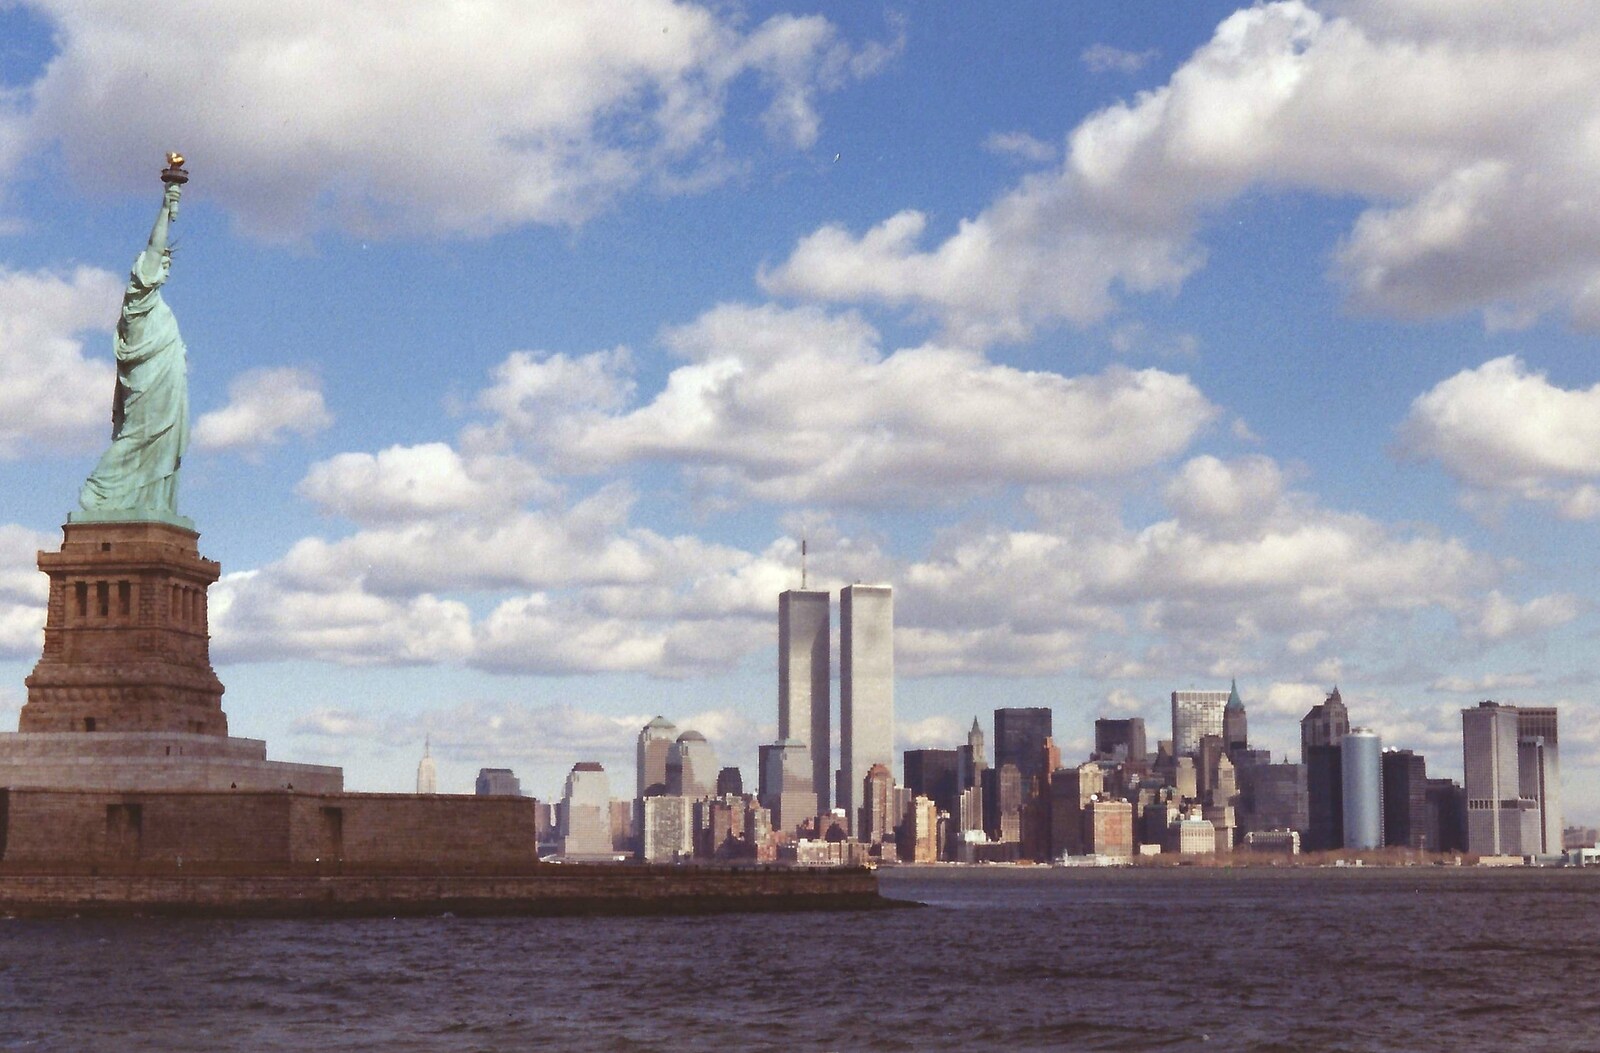 Statue of Liberty and the twin towers from A Trip to New York, New York, USA - 11th March 1995